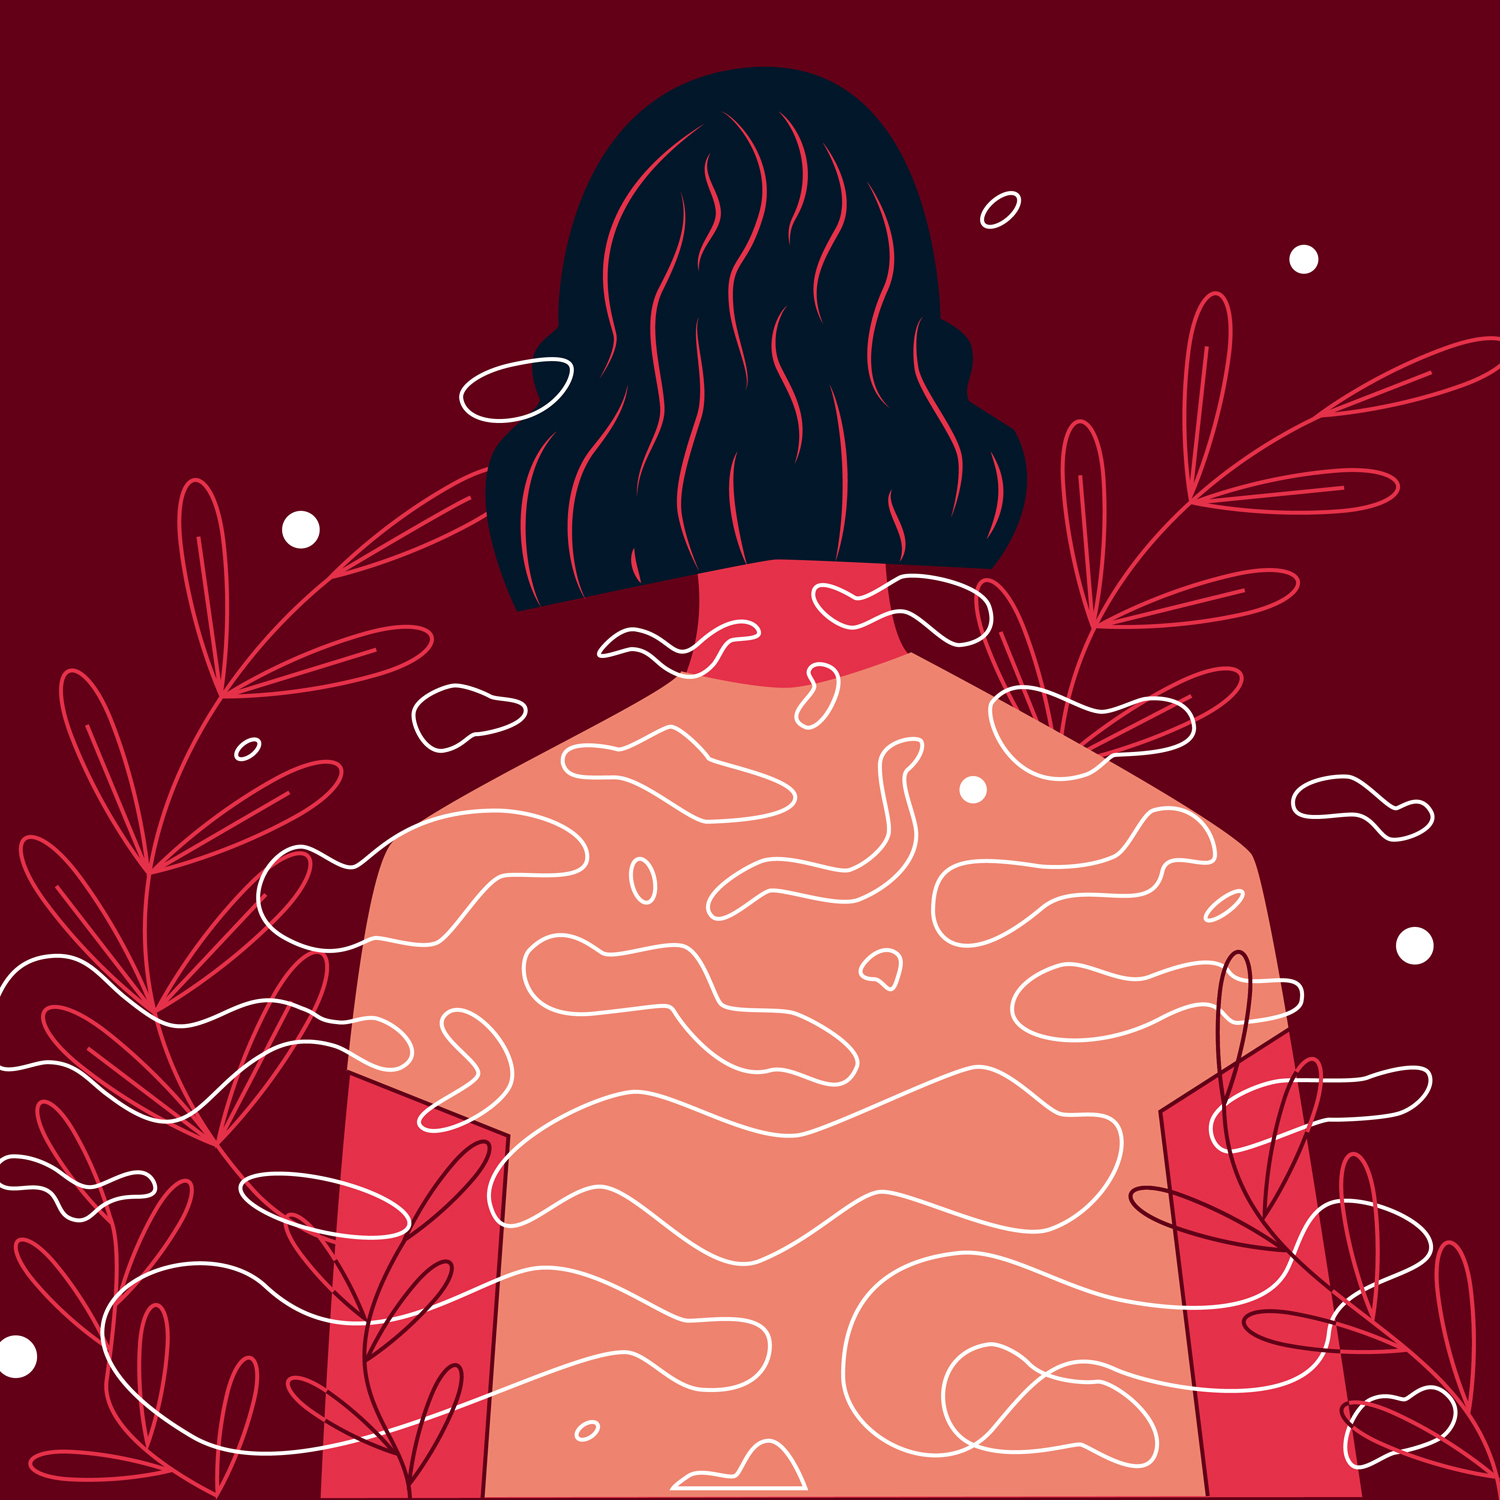 Illustration of a young dark-haired woman standing back to the viewer, surrounded by plants and specks | iammonsie.com